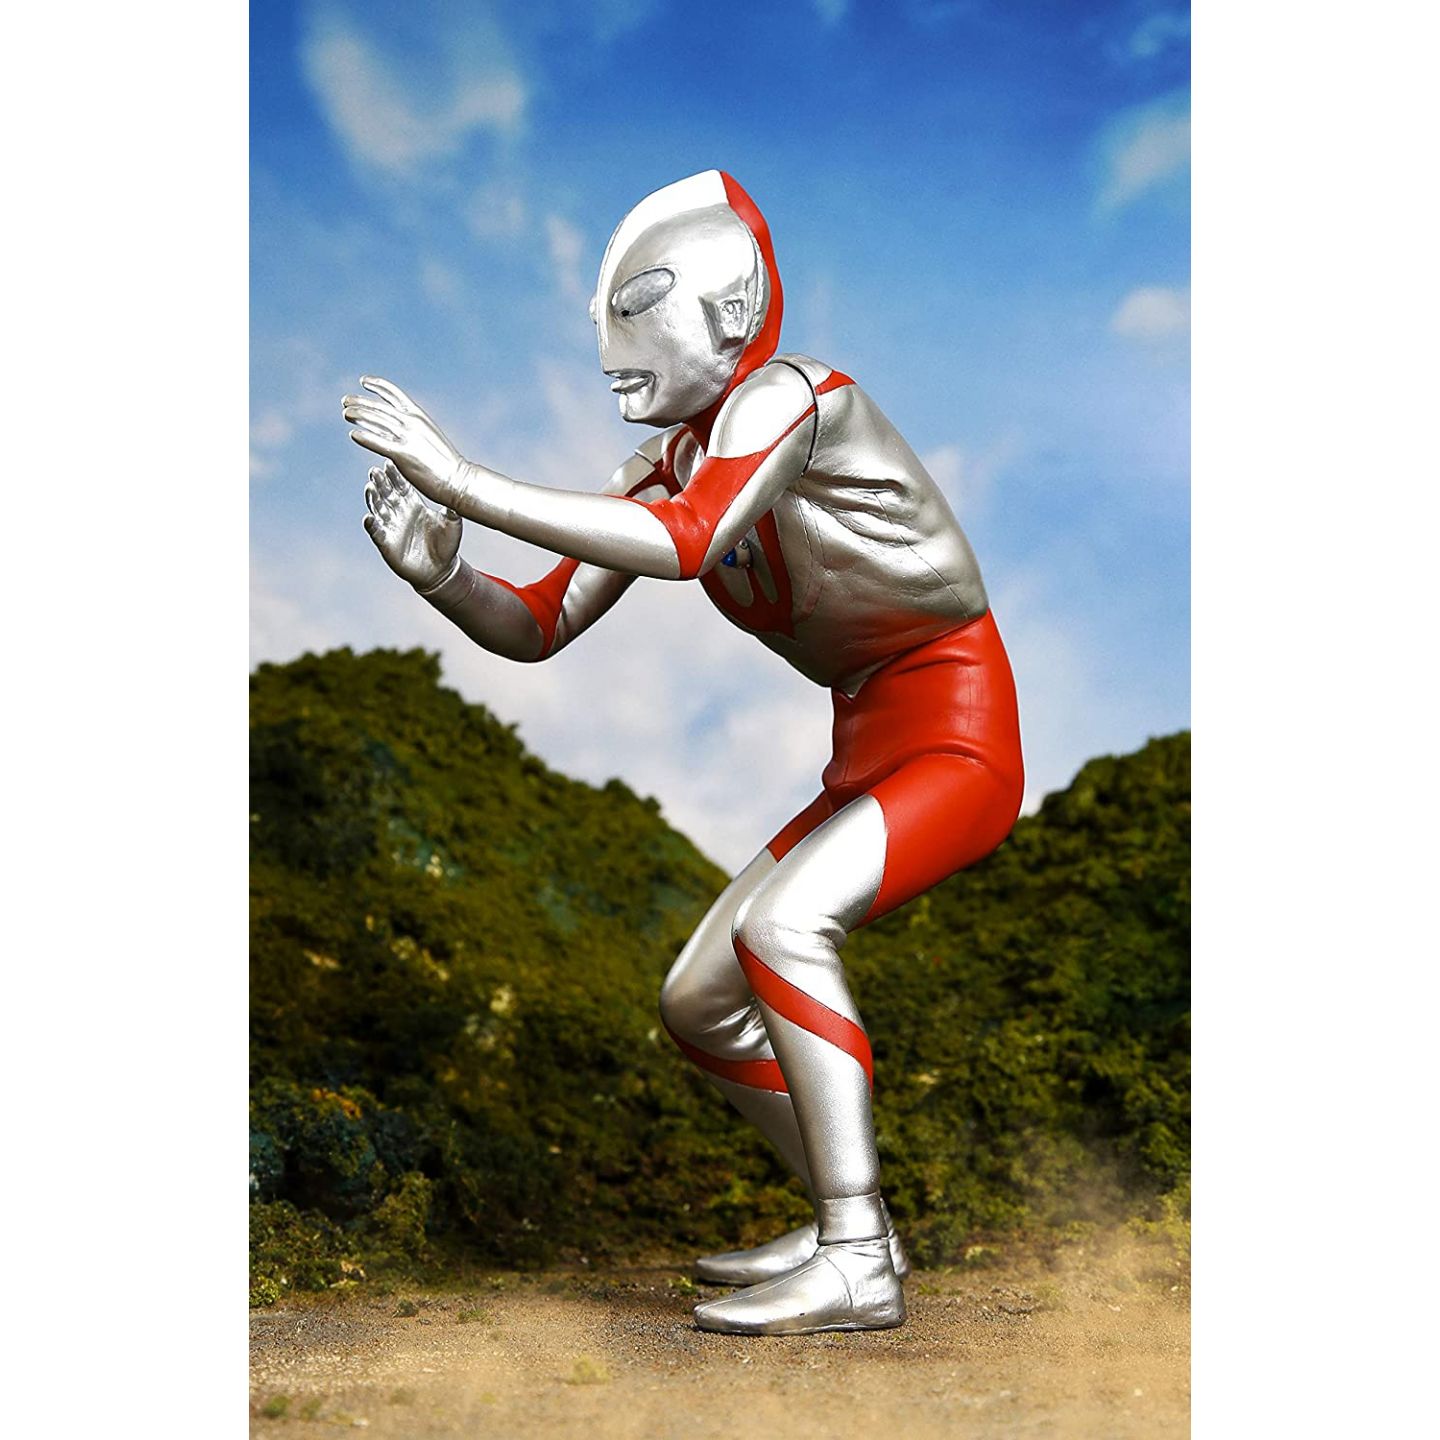 July 27 2012, Tokyo, Japan - A kid poses with Ultraman statue at the 